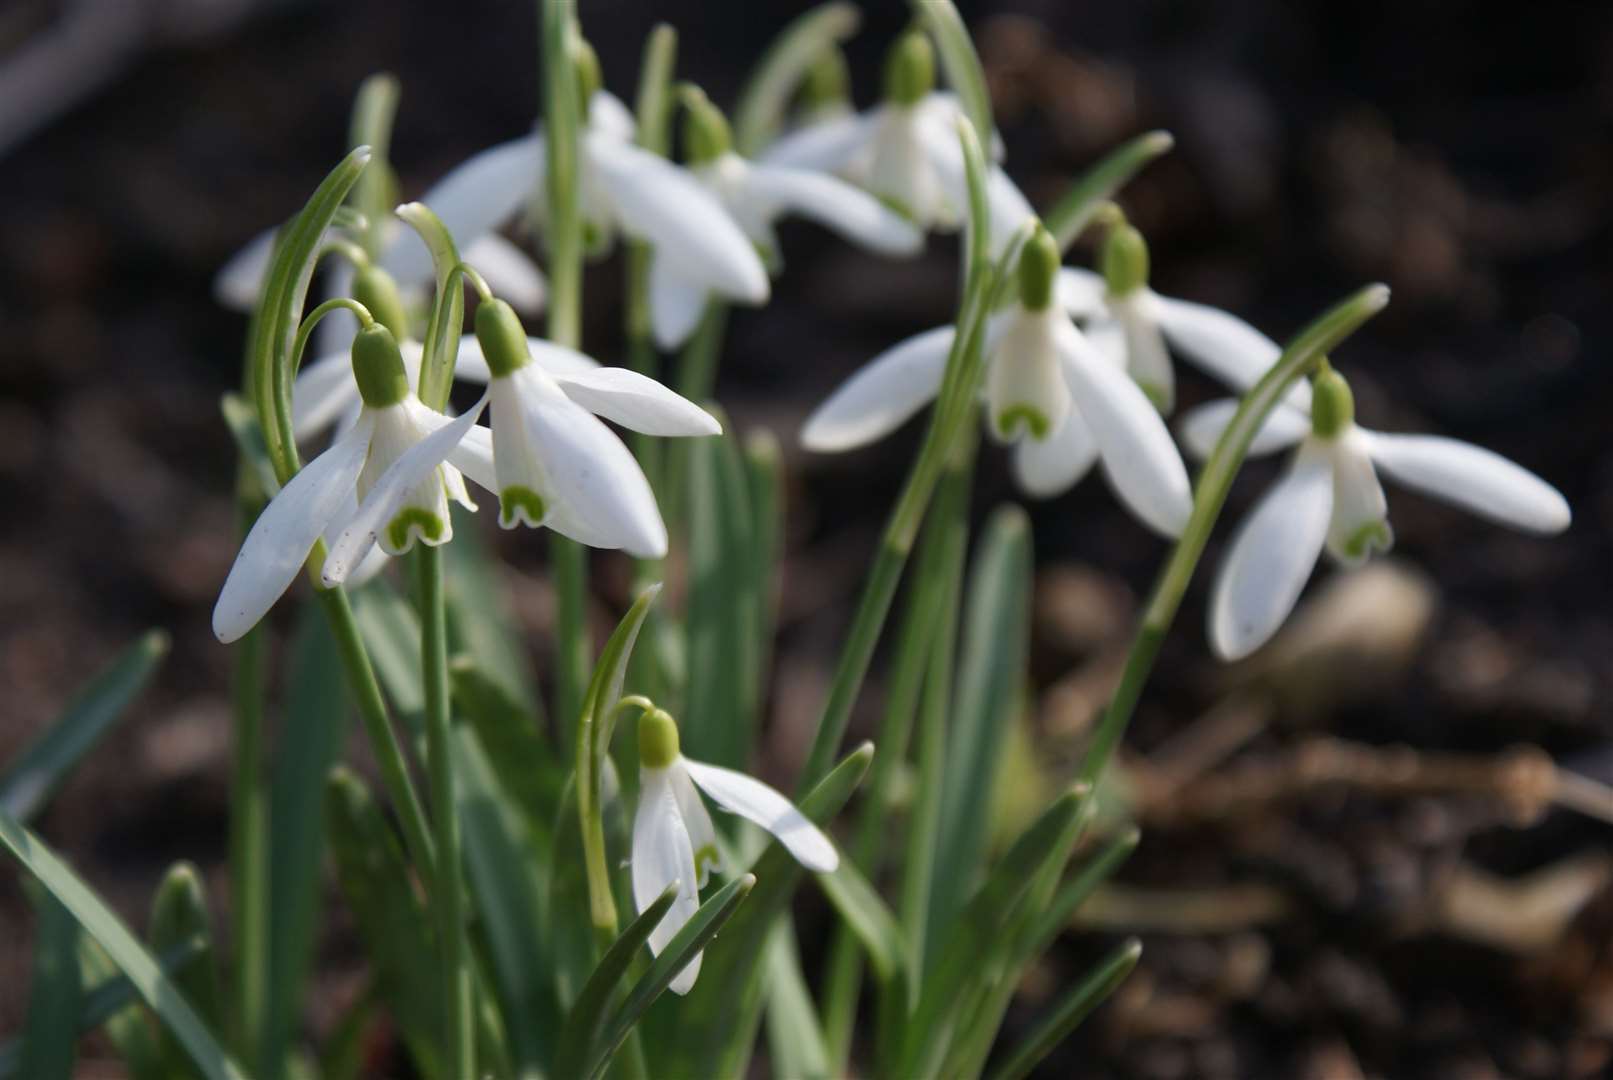 Snowdrops can brighten spirits at this time of year.